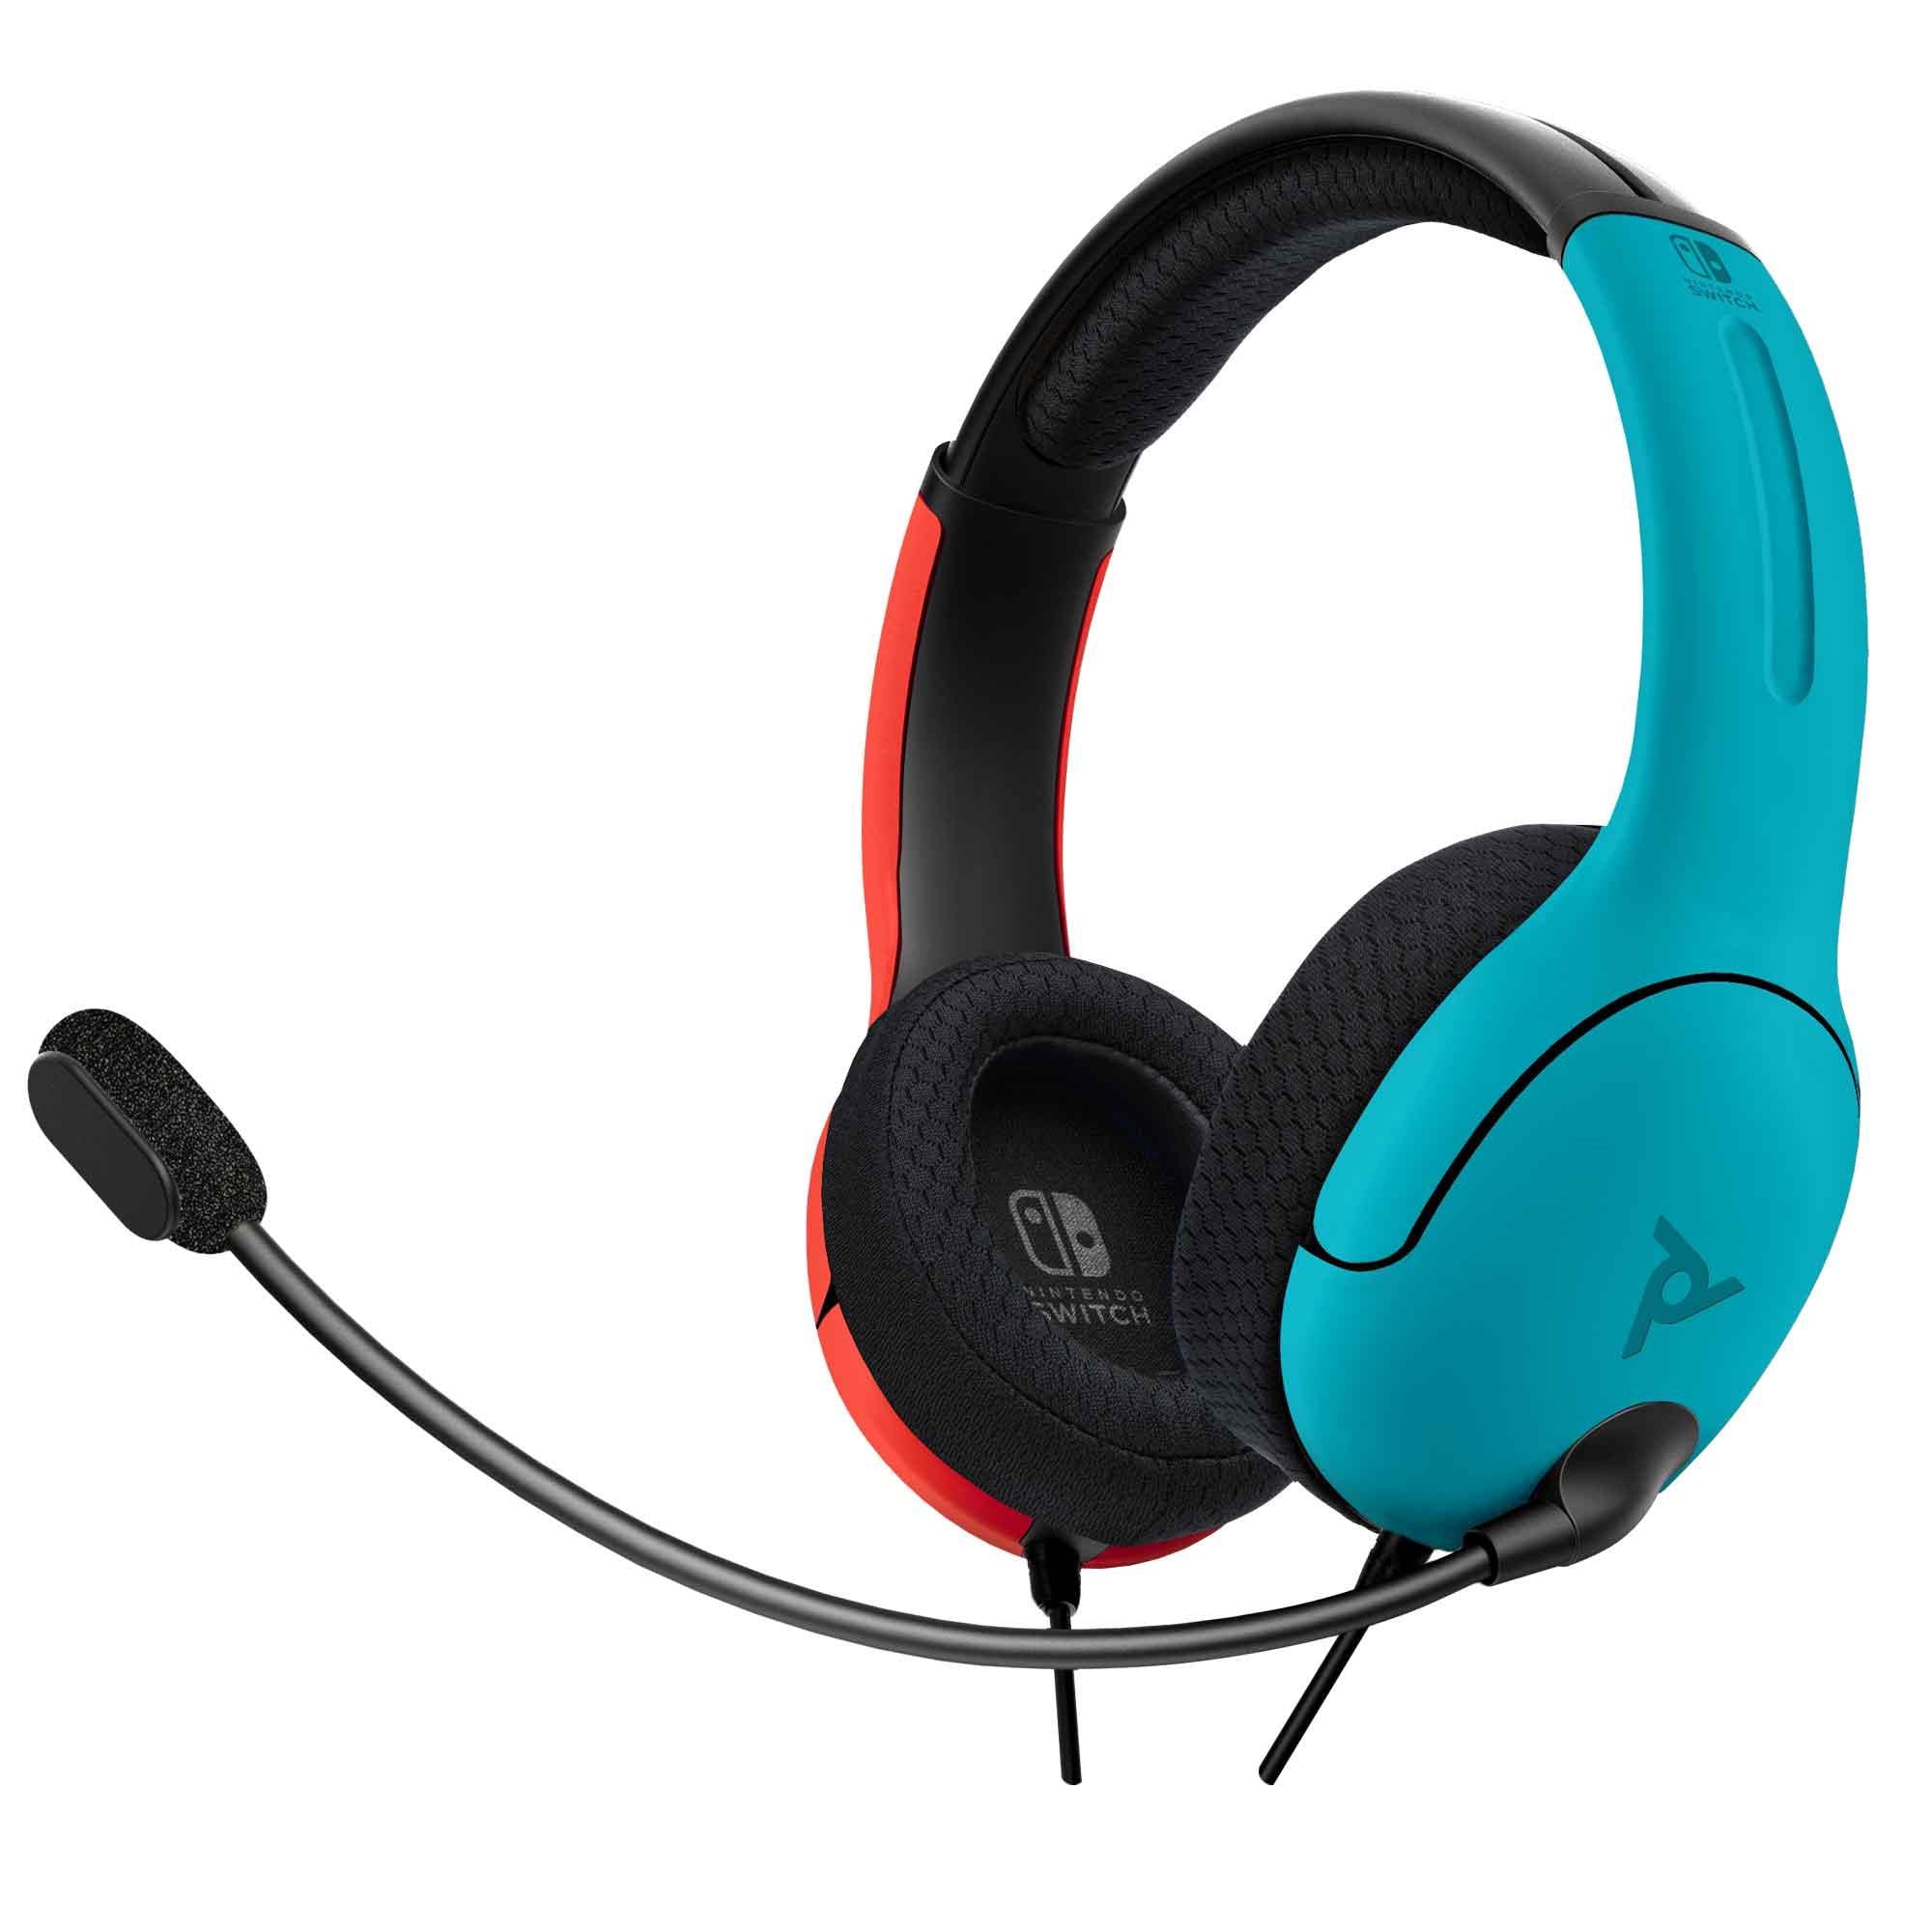 lvl 40 wired gaming headset for nintendo switch joycon (blue/red)